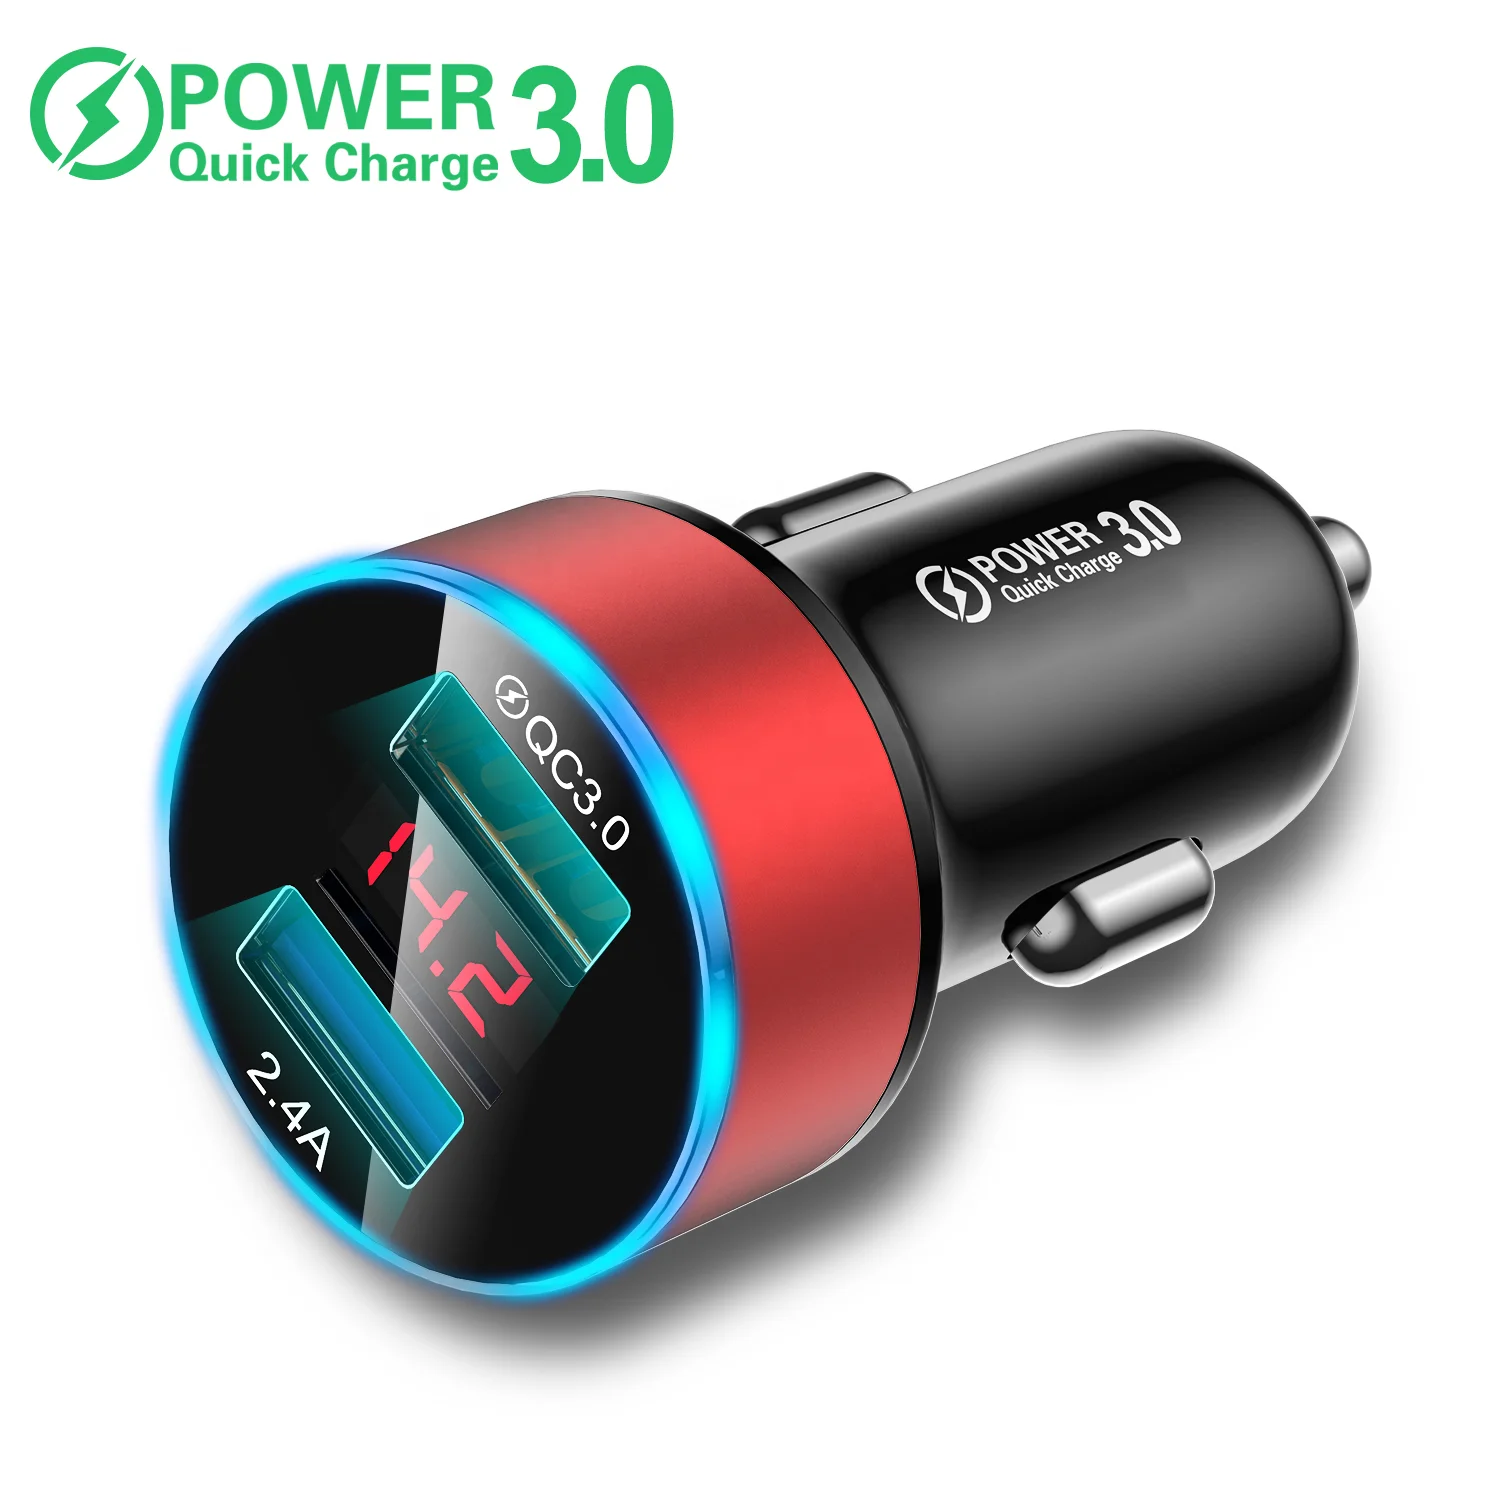 

USLION Super Fast Car Charger QC 3.0 Metal Car Charger for iPhone Dual Port USB Car Charger, Black,blue,gold,red,silver